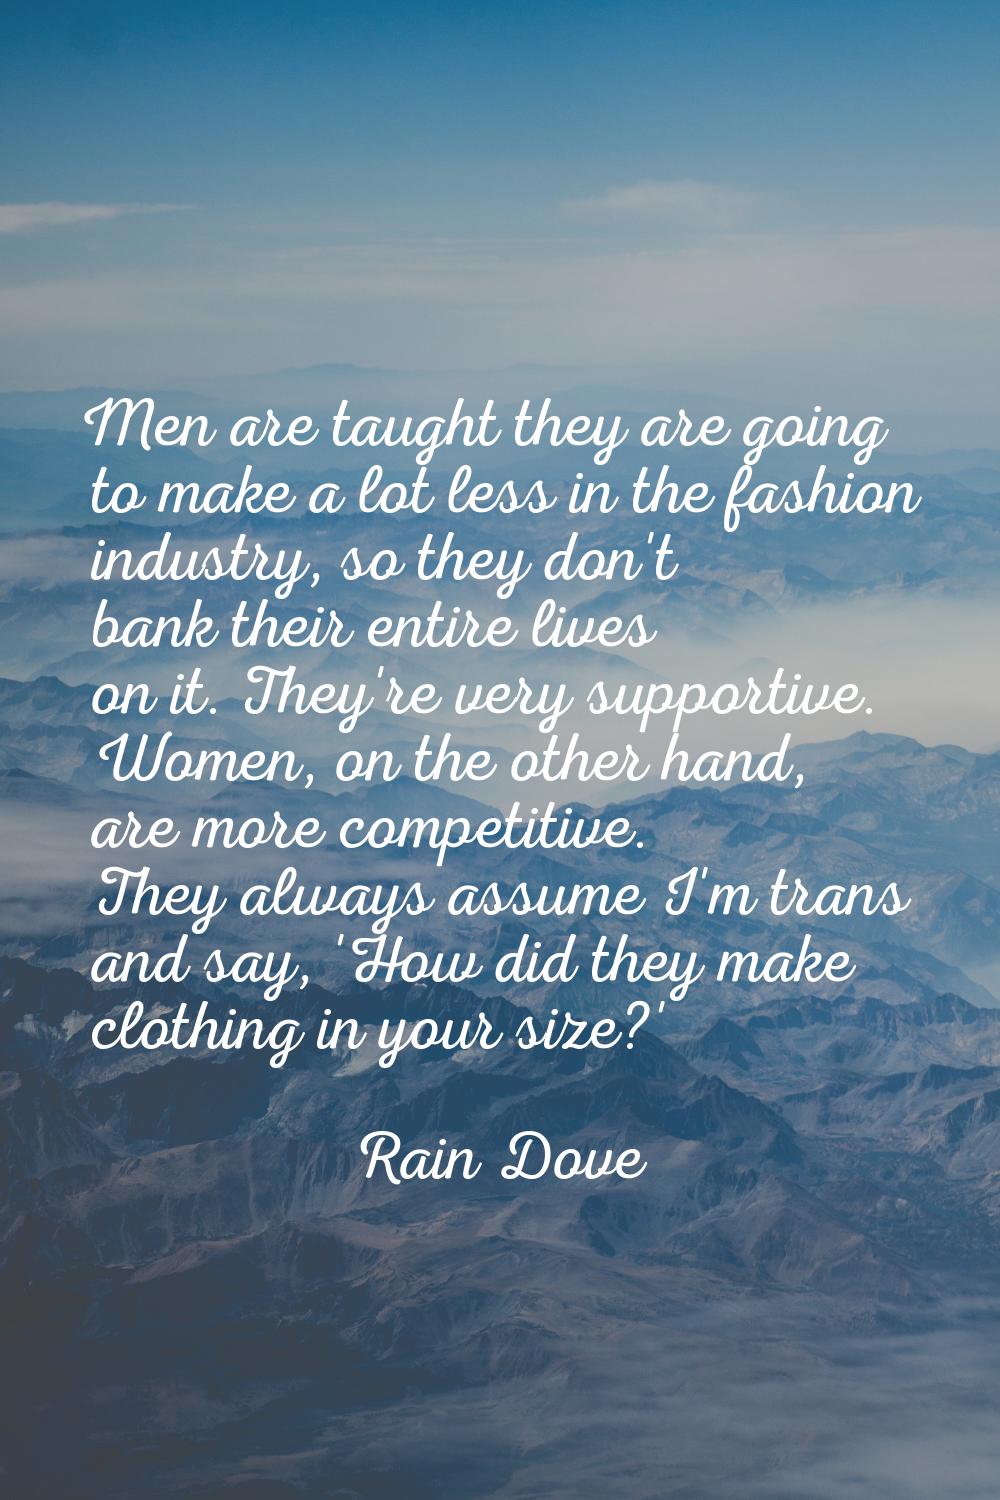 Men are taught they are going to make a lot less in the fashion industry, so they don't bank their 